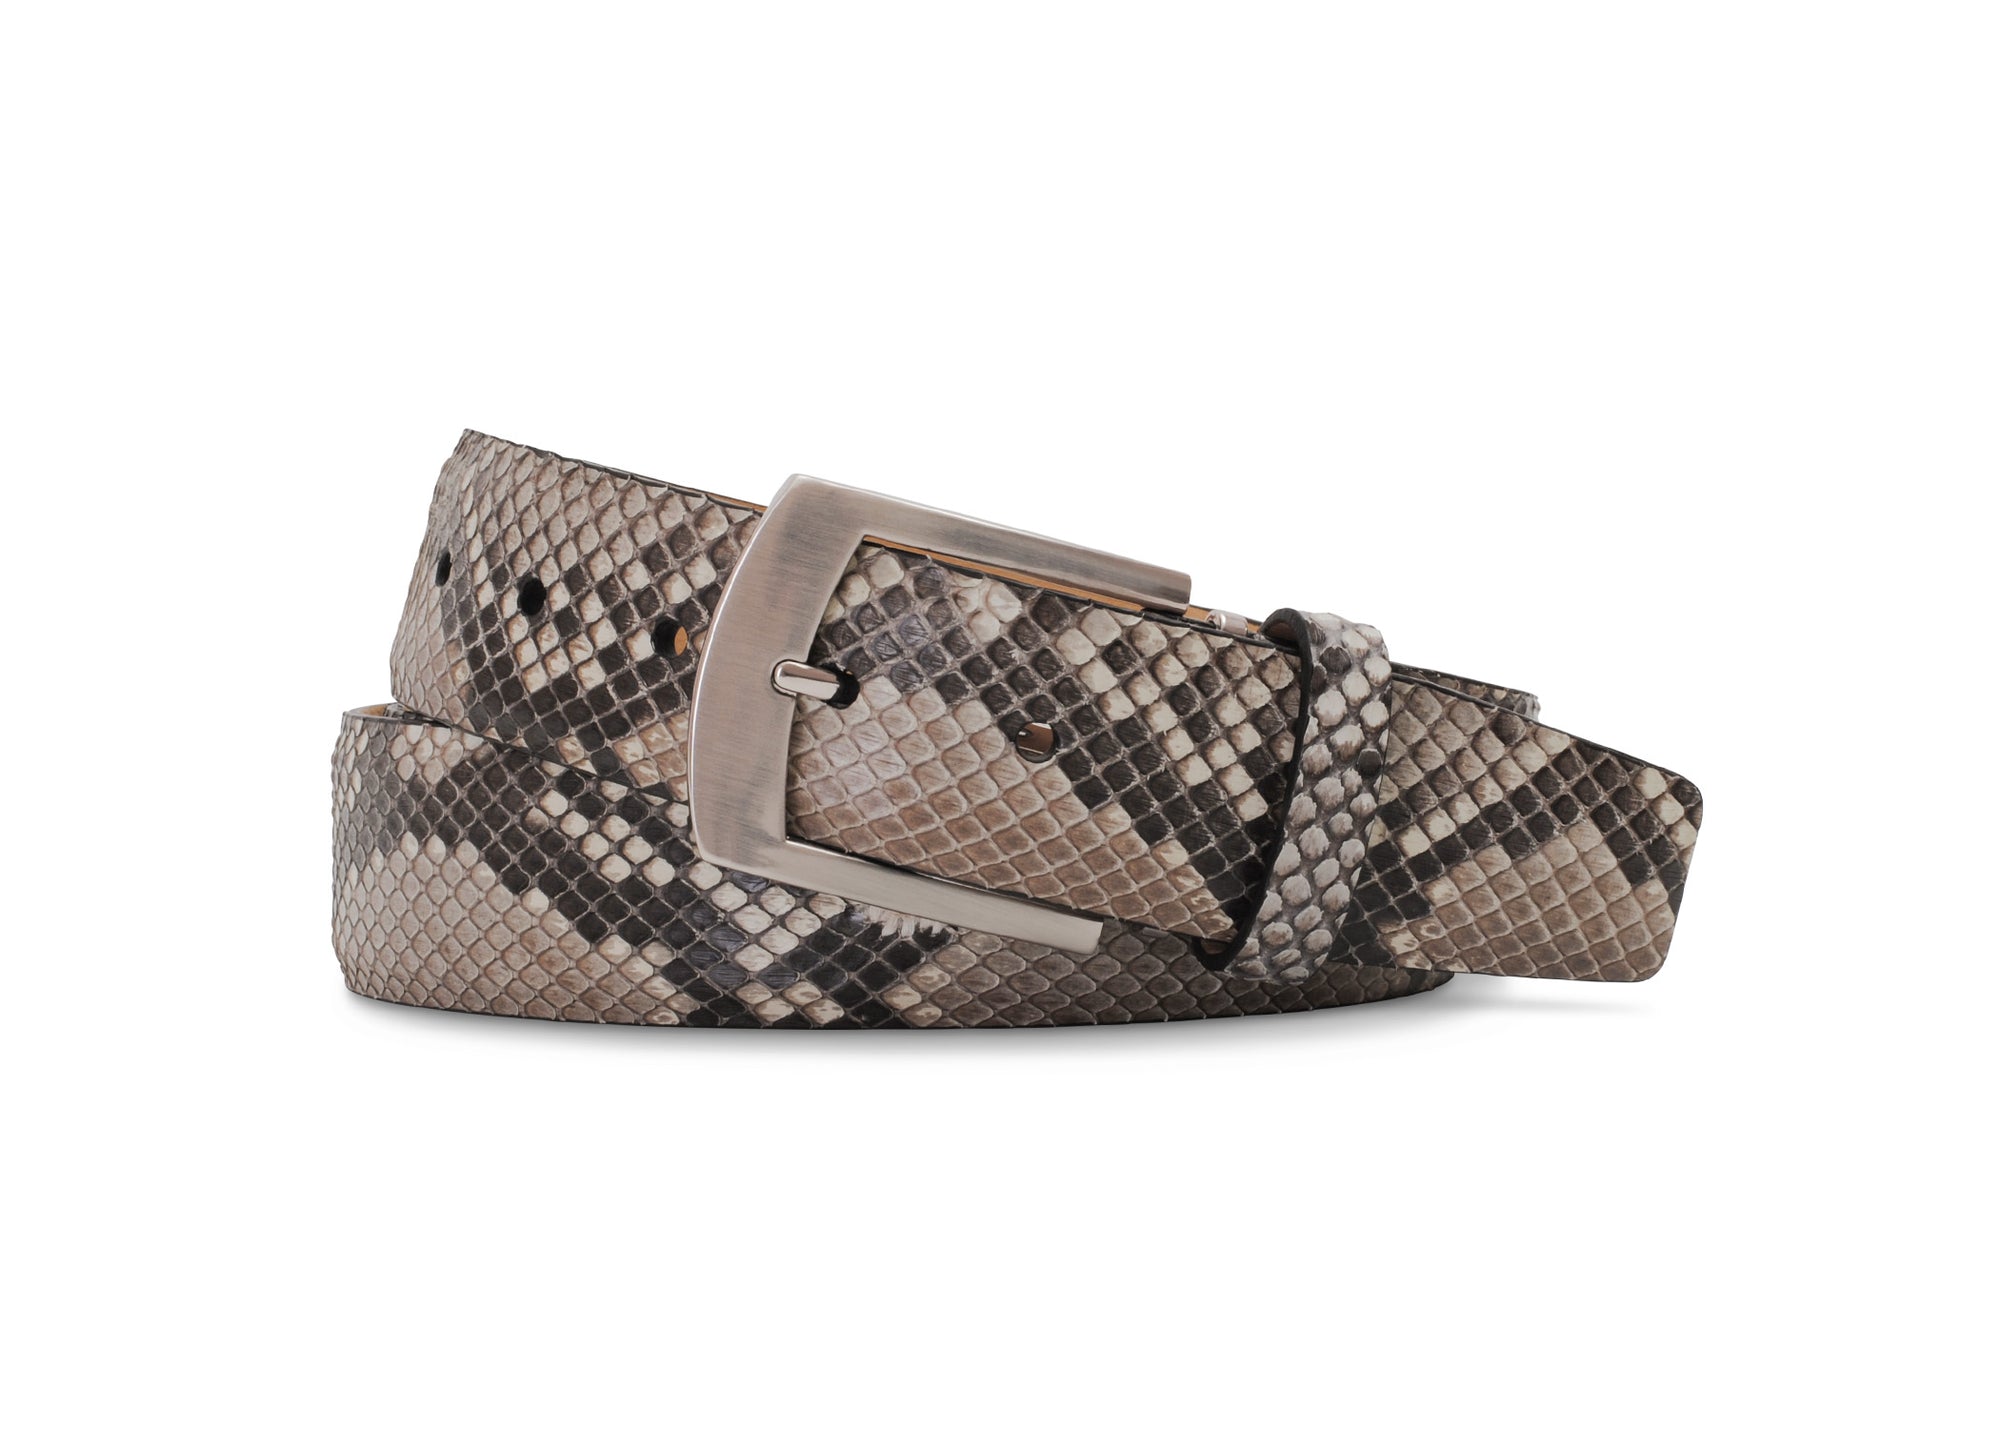 Matte Finish Belly-Cut Python Belt in Natural by Brookes & Hyde